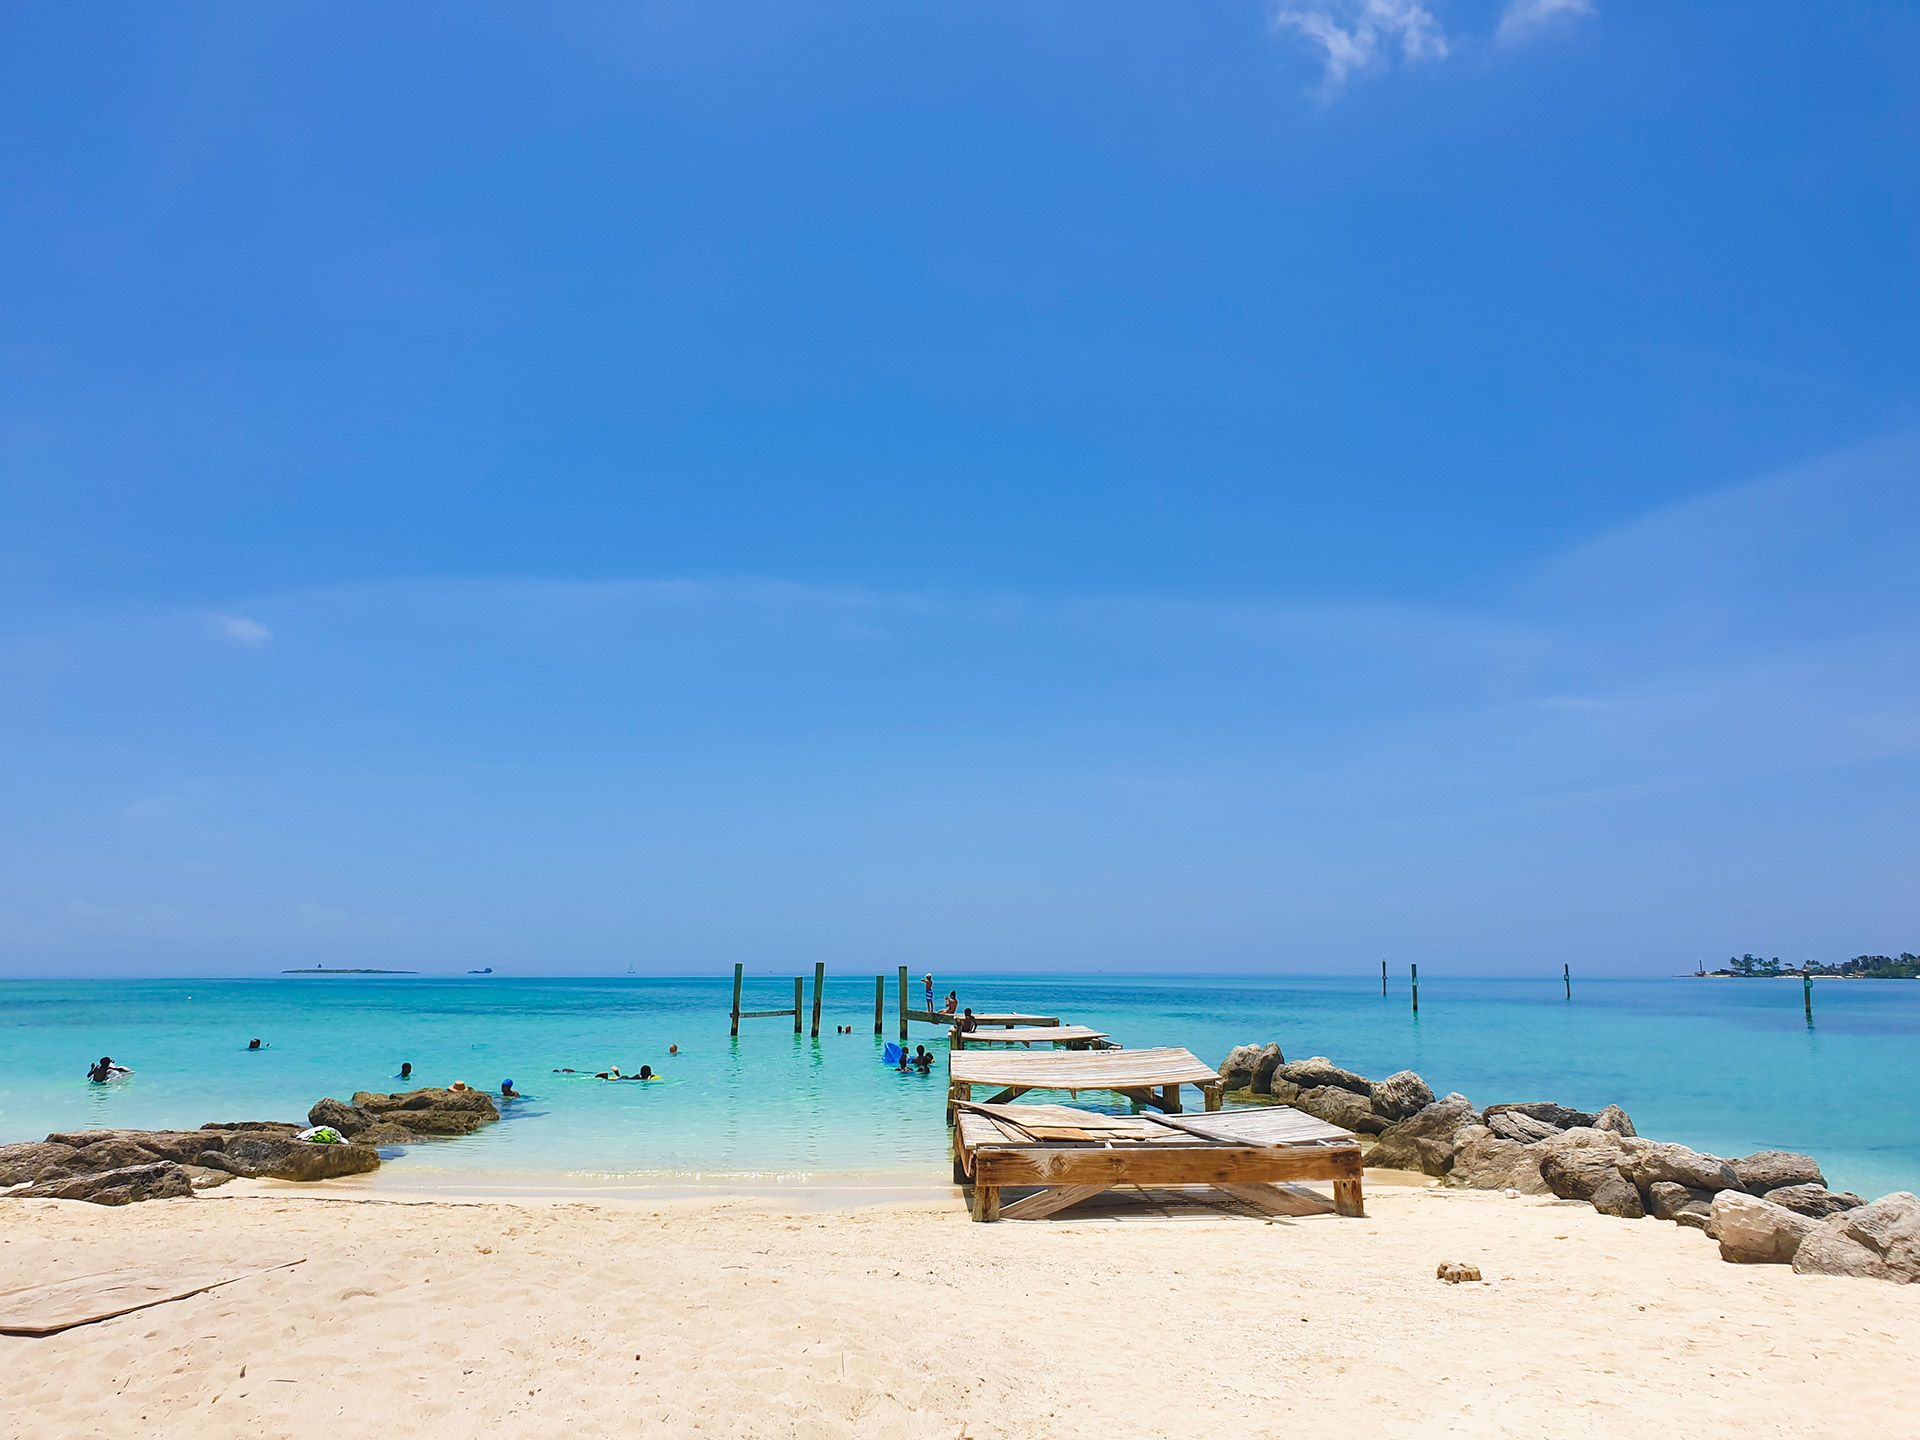 The 12 Best Beaches in Nassau, The Bahamas (Incl. Photos) - Sandals